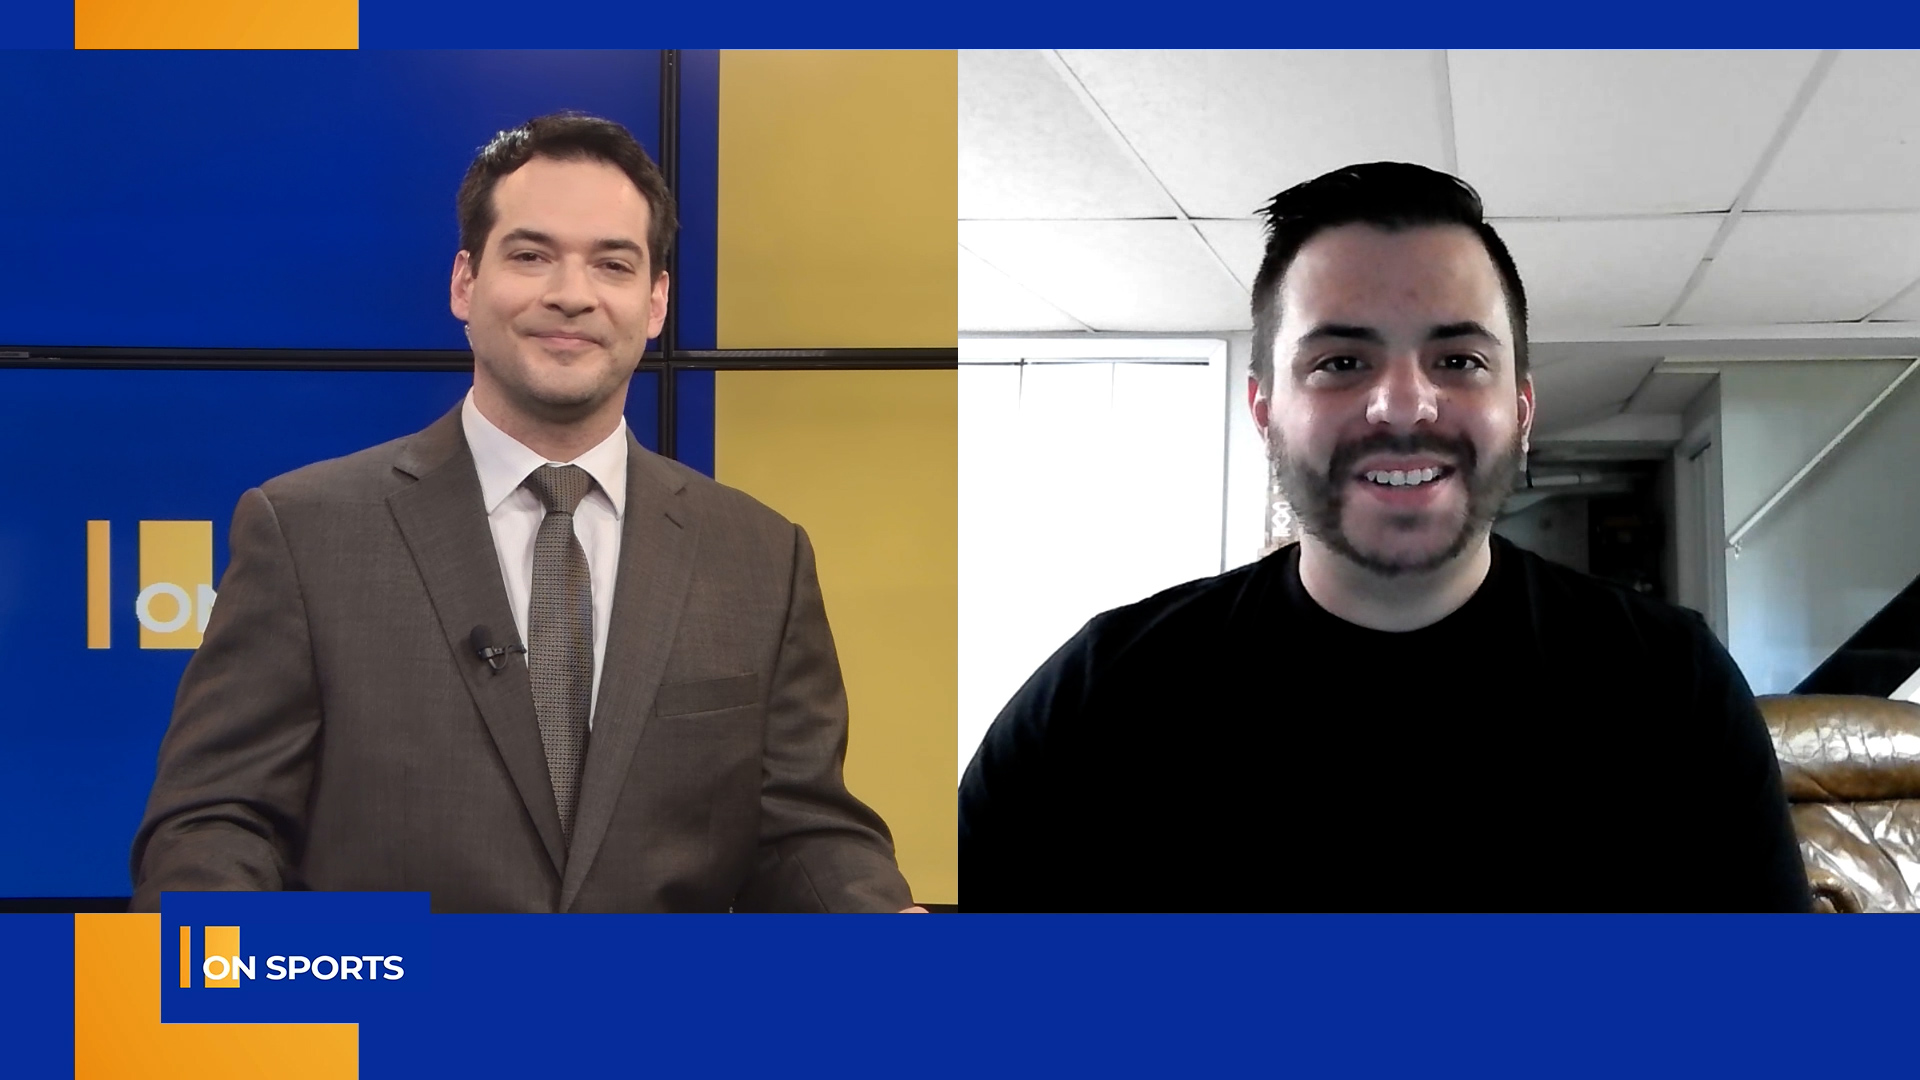 On Sports – Local Sports with Bobby Santoro